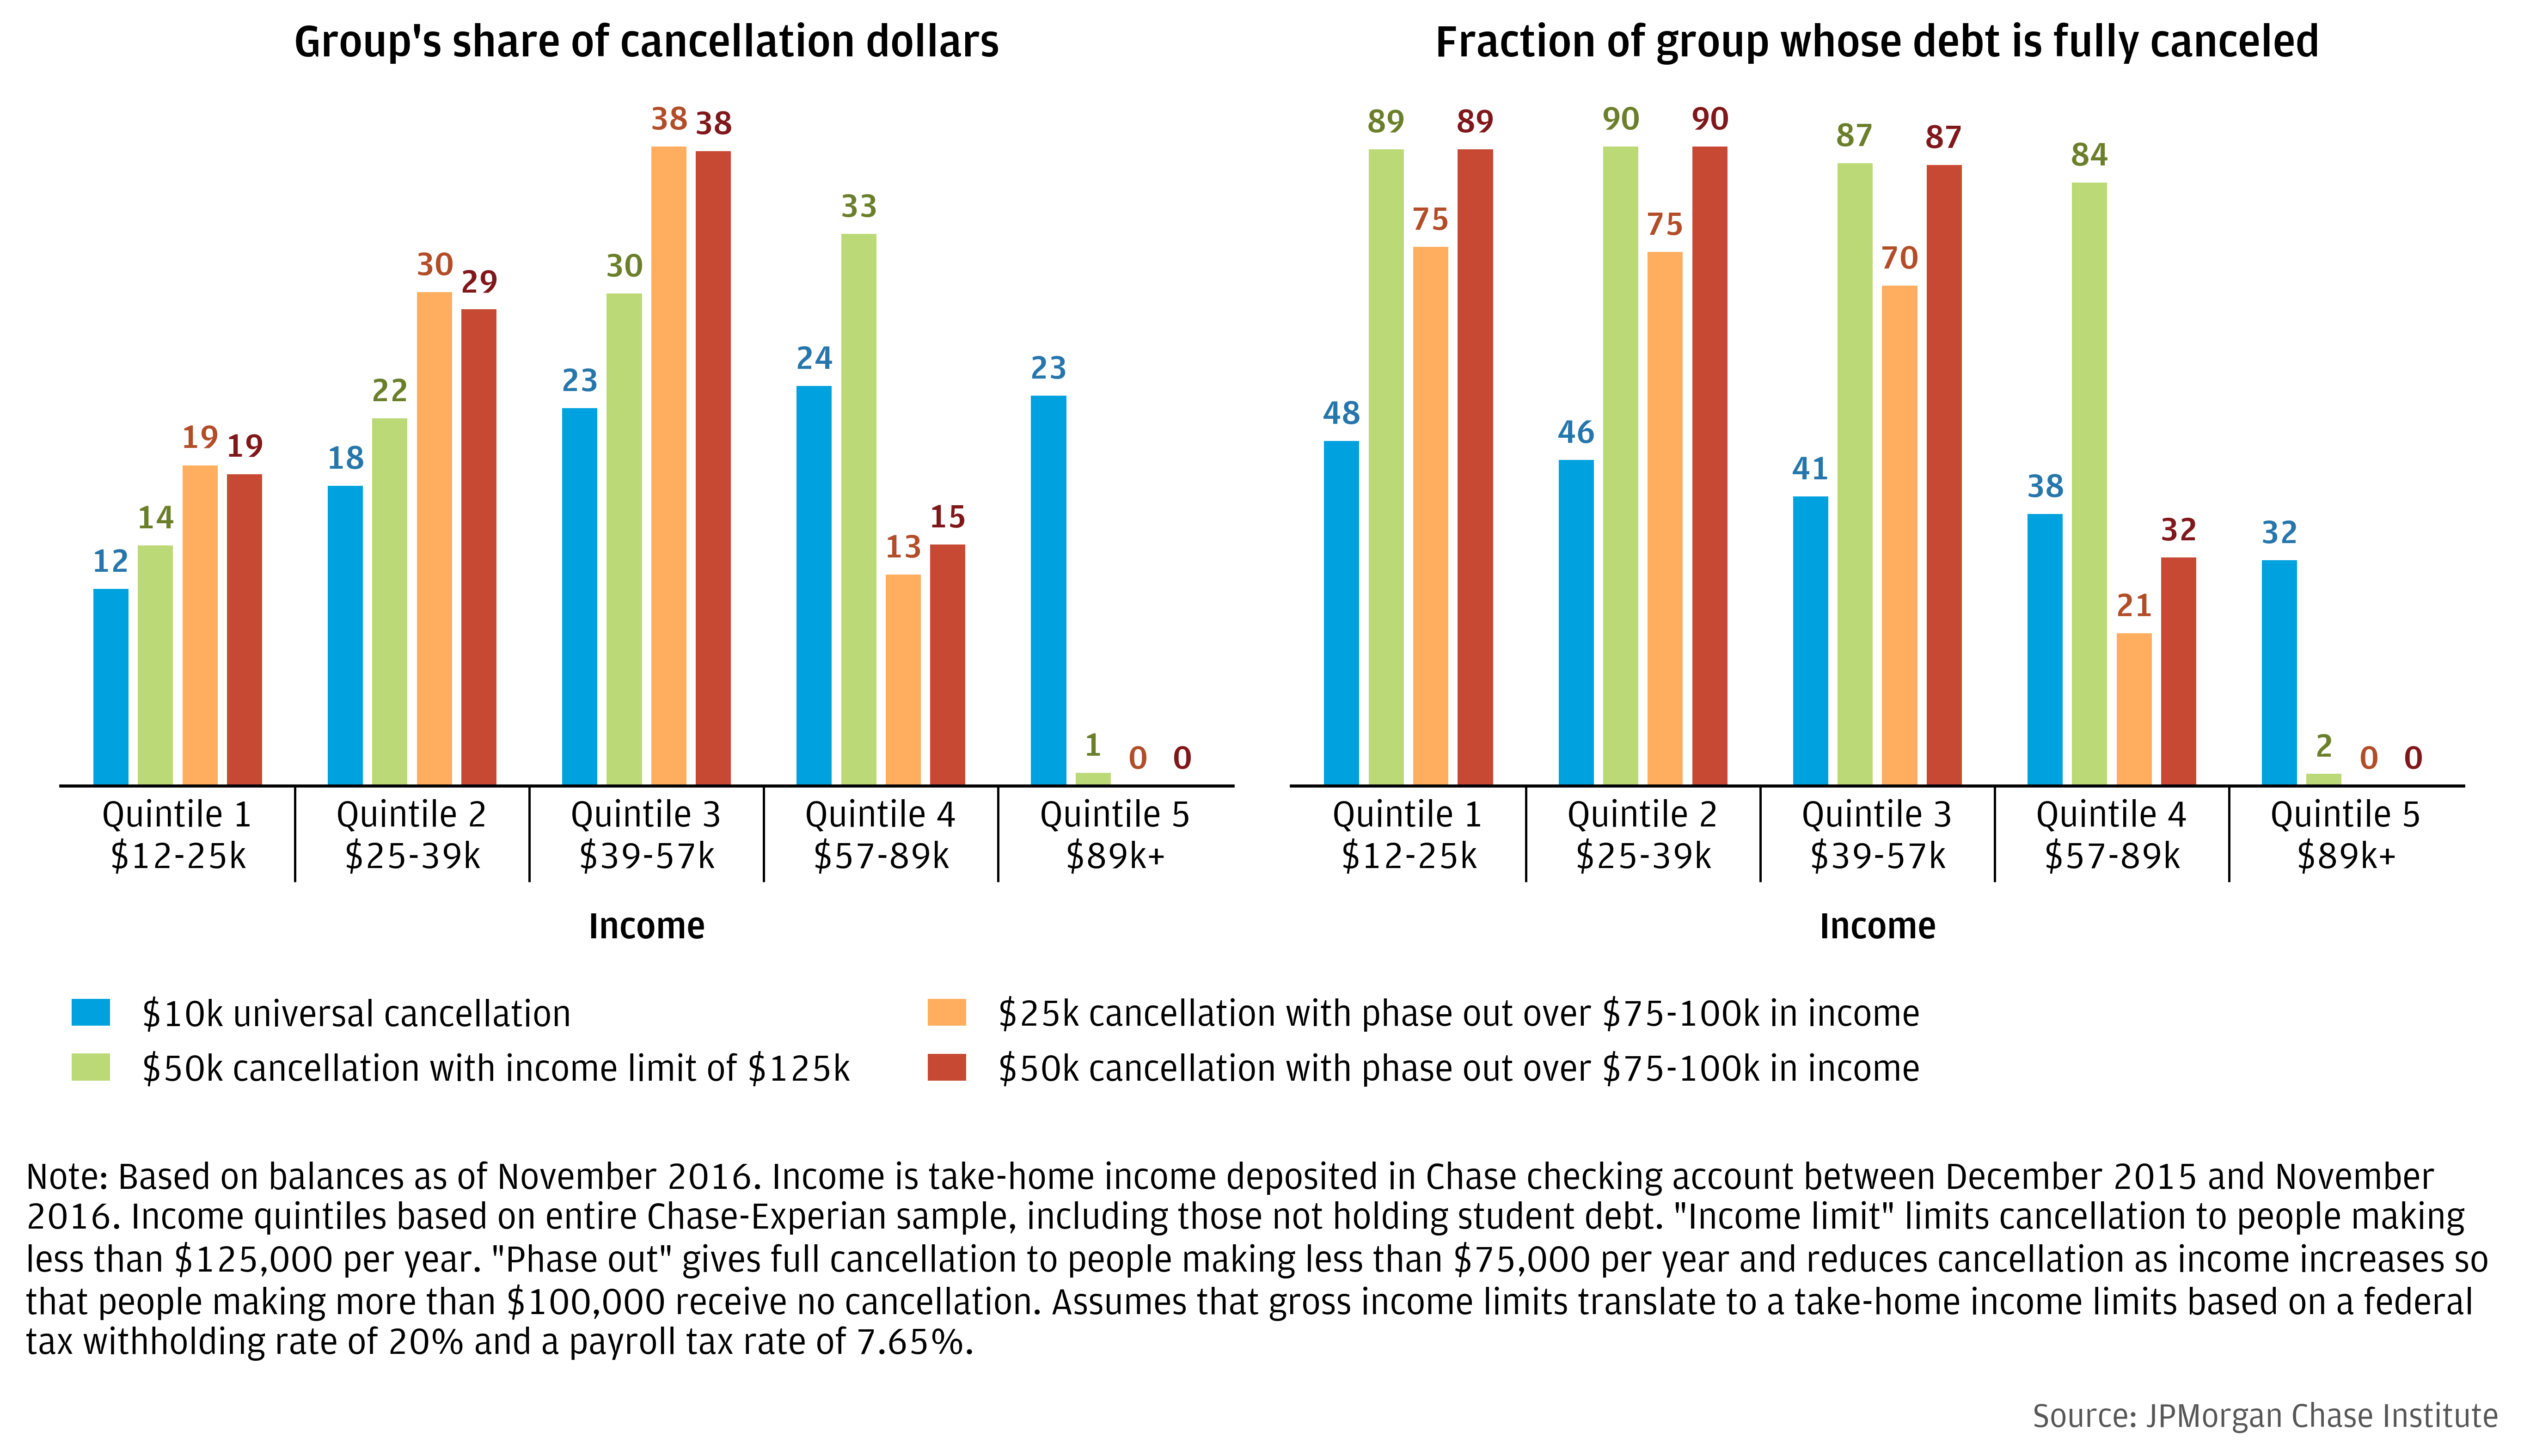 Distribution of cancellation benefits by income